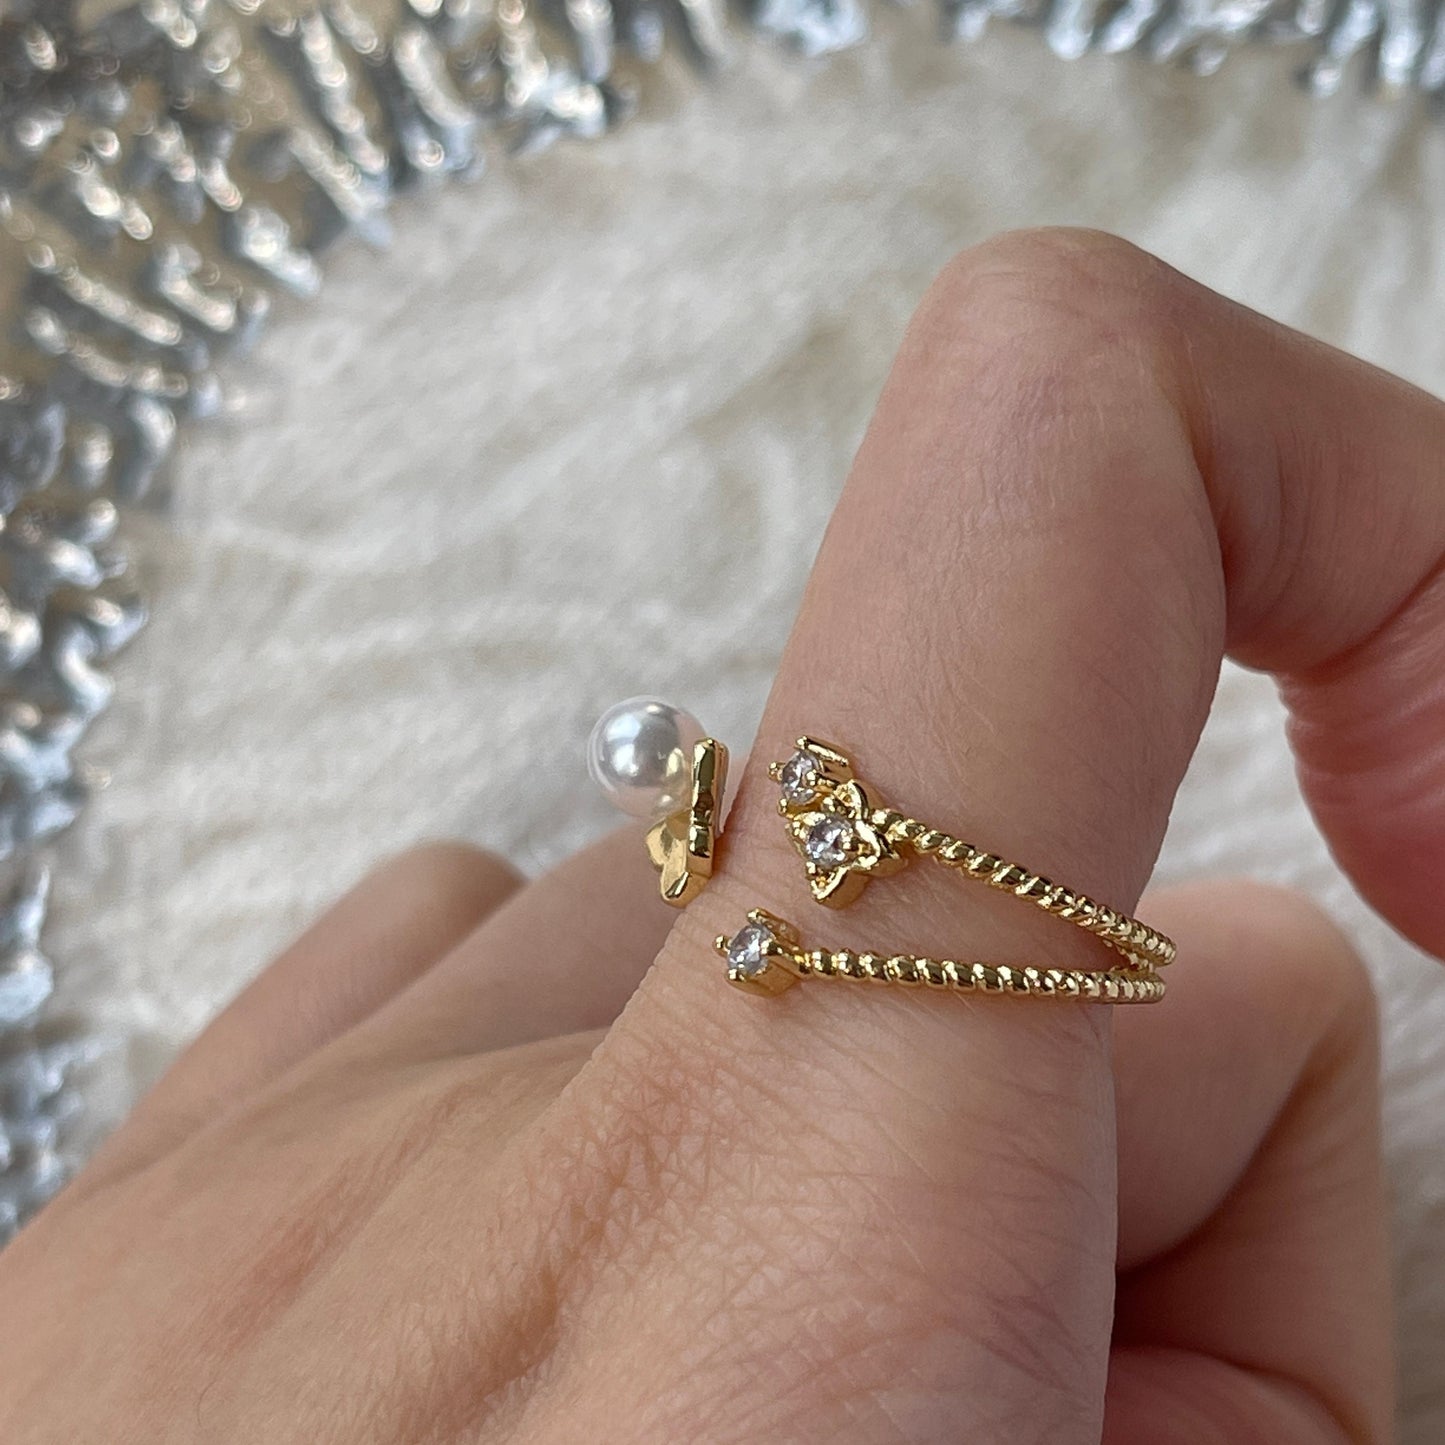 Gold butterfly ring, Pearl floral ring, Multi layer ring, Golden star ring, Minimalist stacking ring, Gold vine cz ring, Dainty open rings